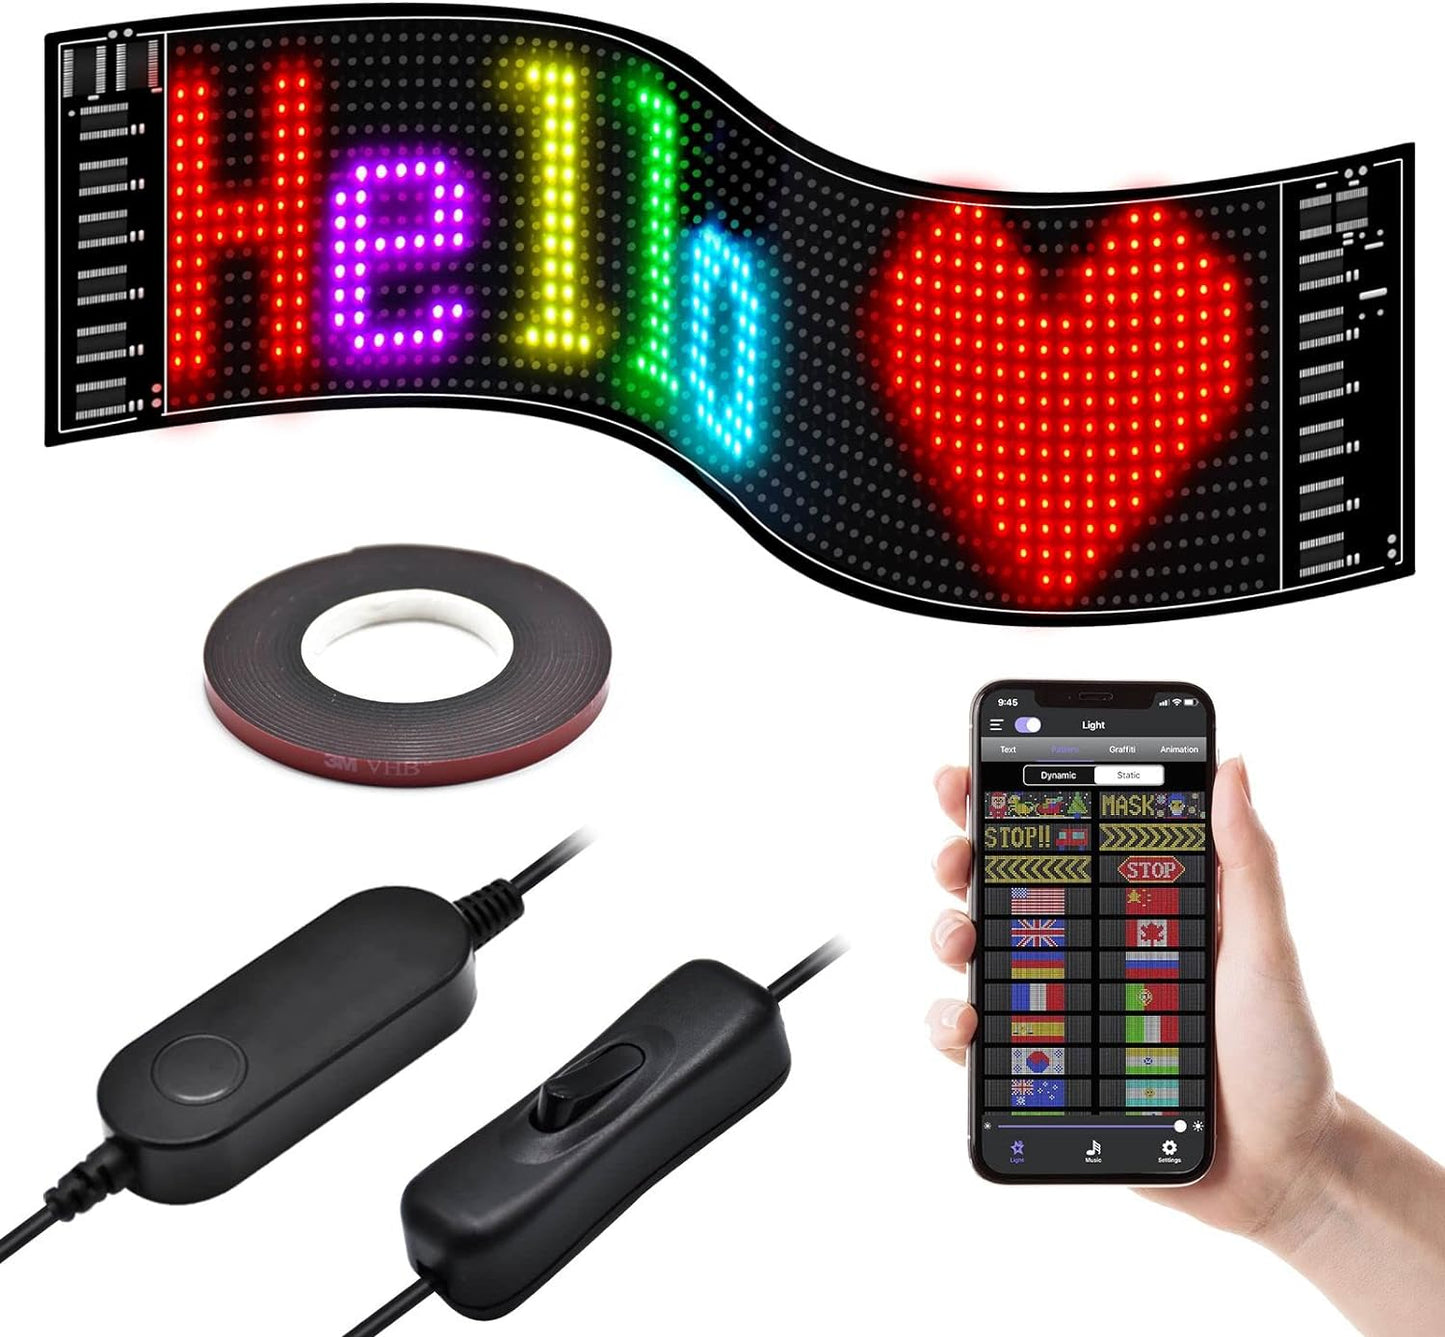 Keria Scrolling LED Sign,Programmable Flexible LED Matrix Panel,LED Sign for Car,Bluetooth APP Control,DIY Design Text, Patterns, Animations (37/inchx 8/inch) black